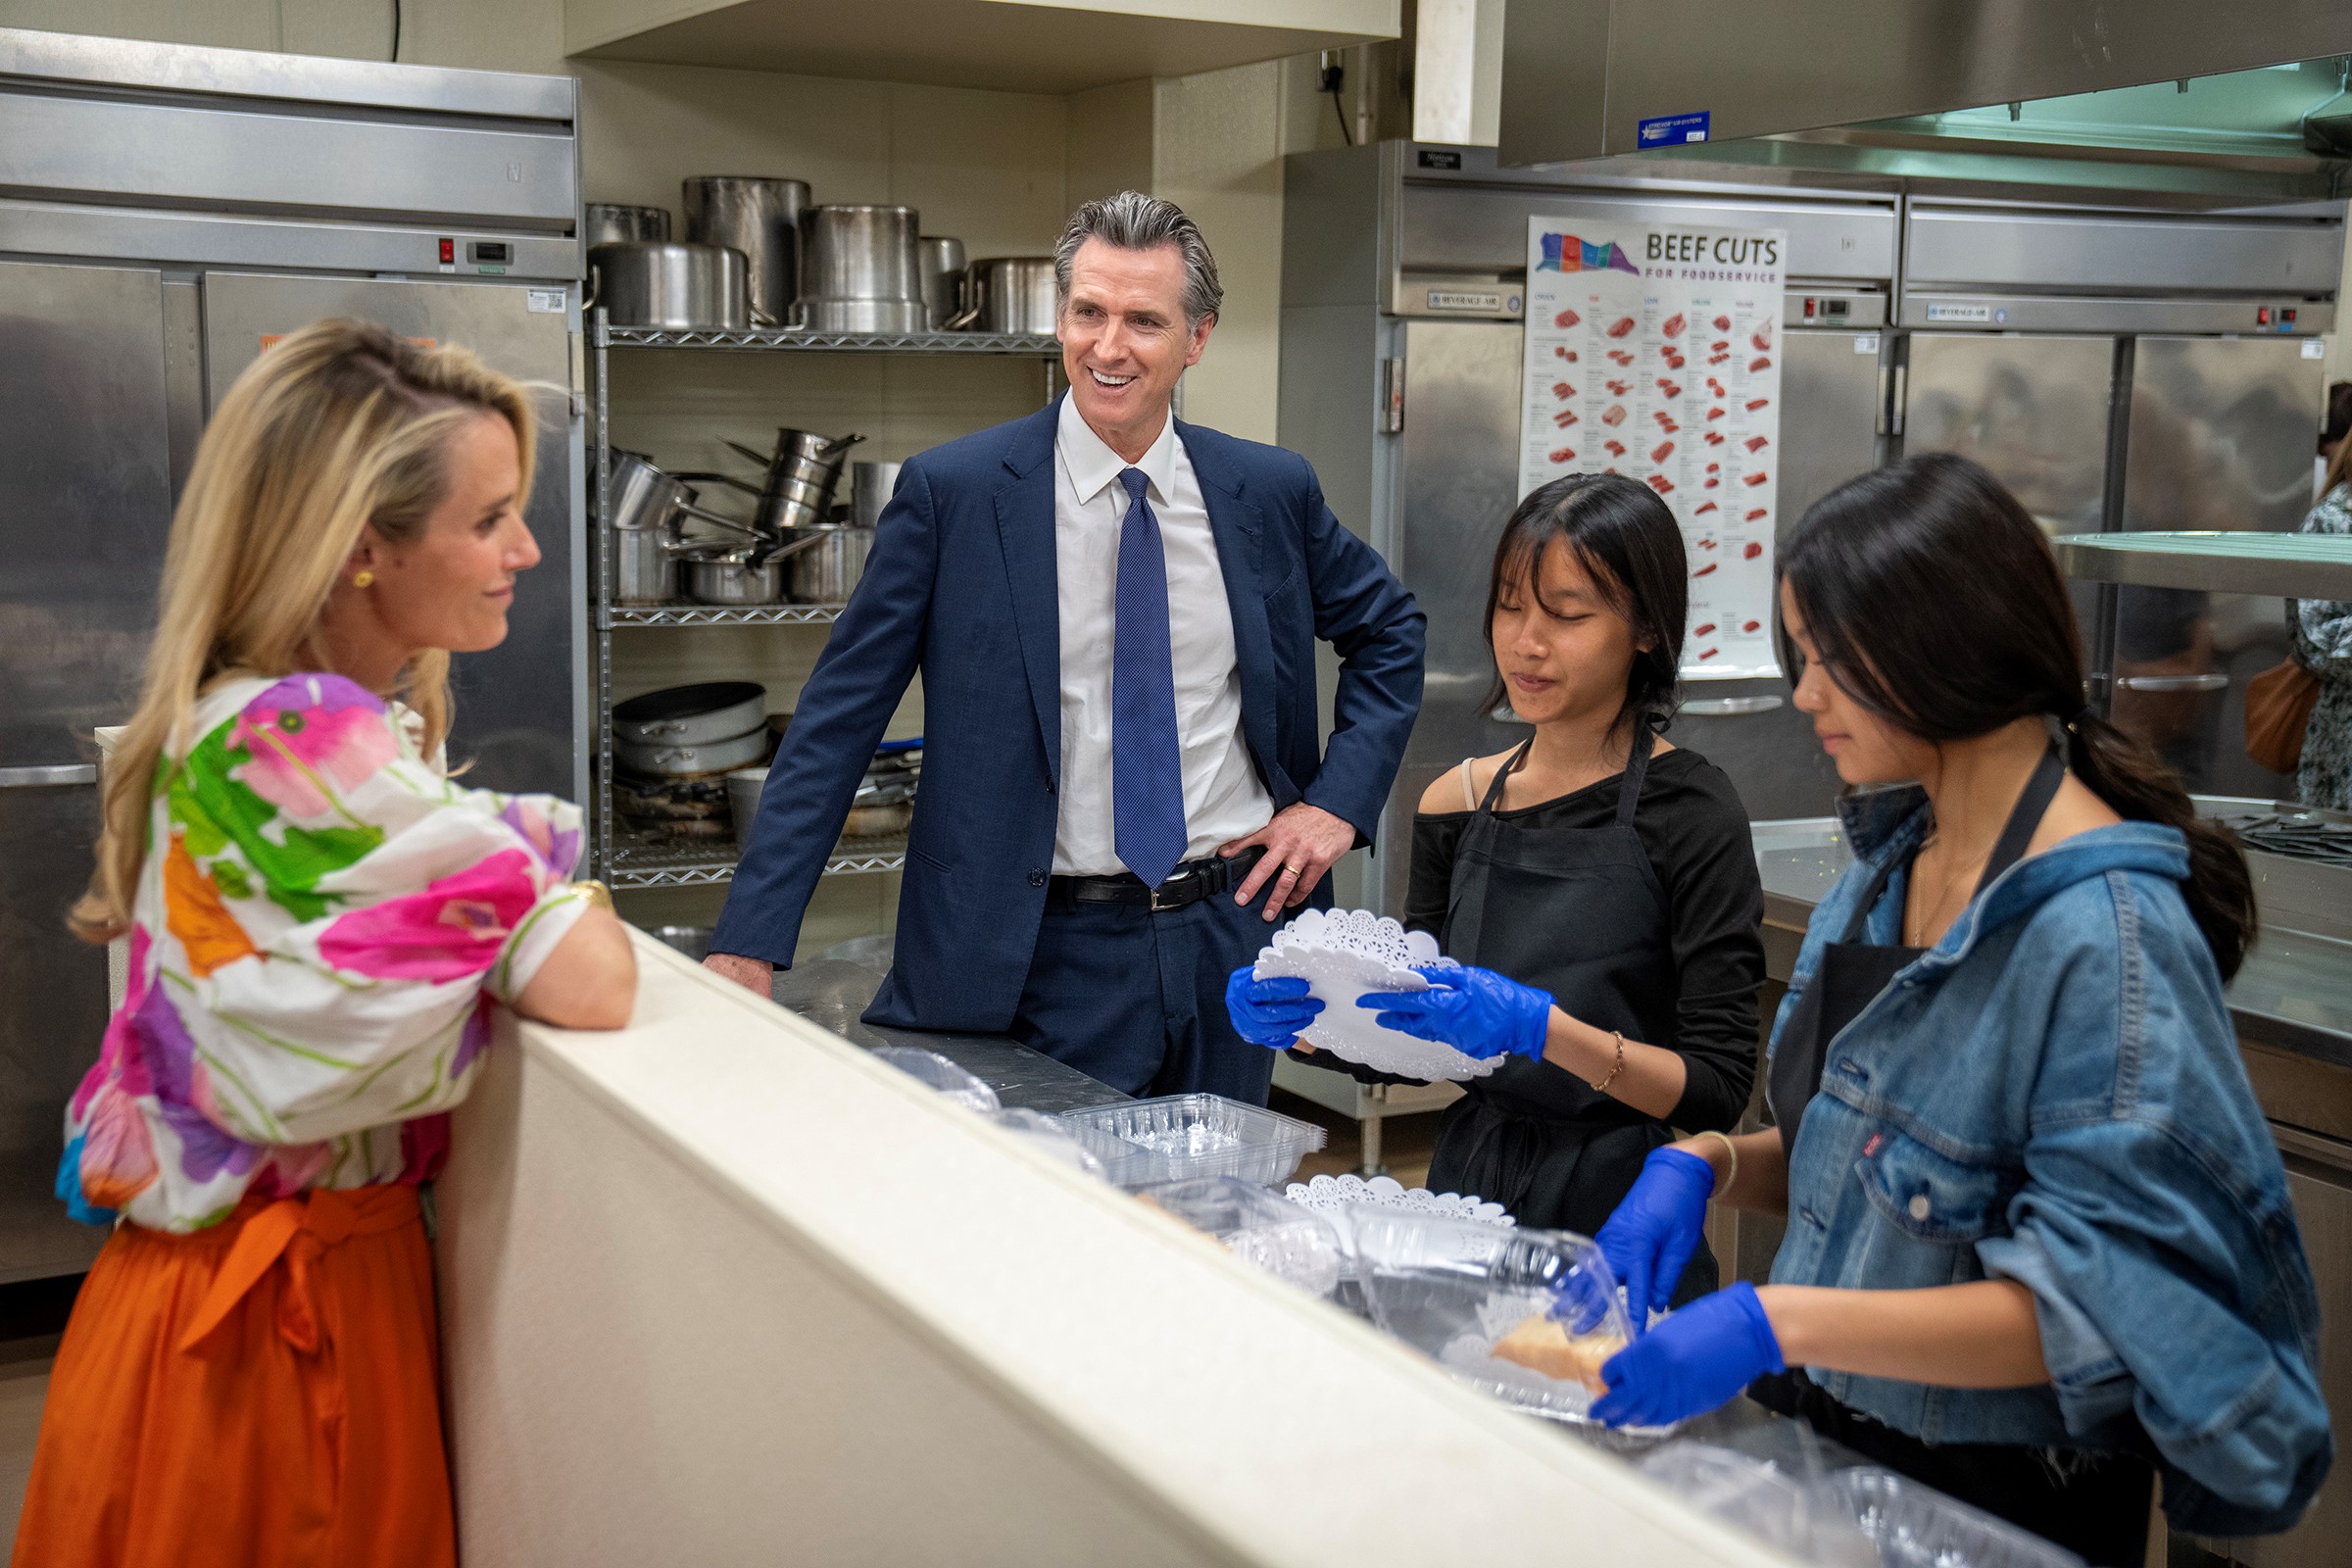 Governor Newsom and the First Partner visit students in a career pathway program